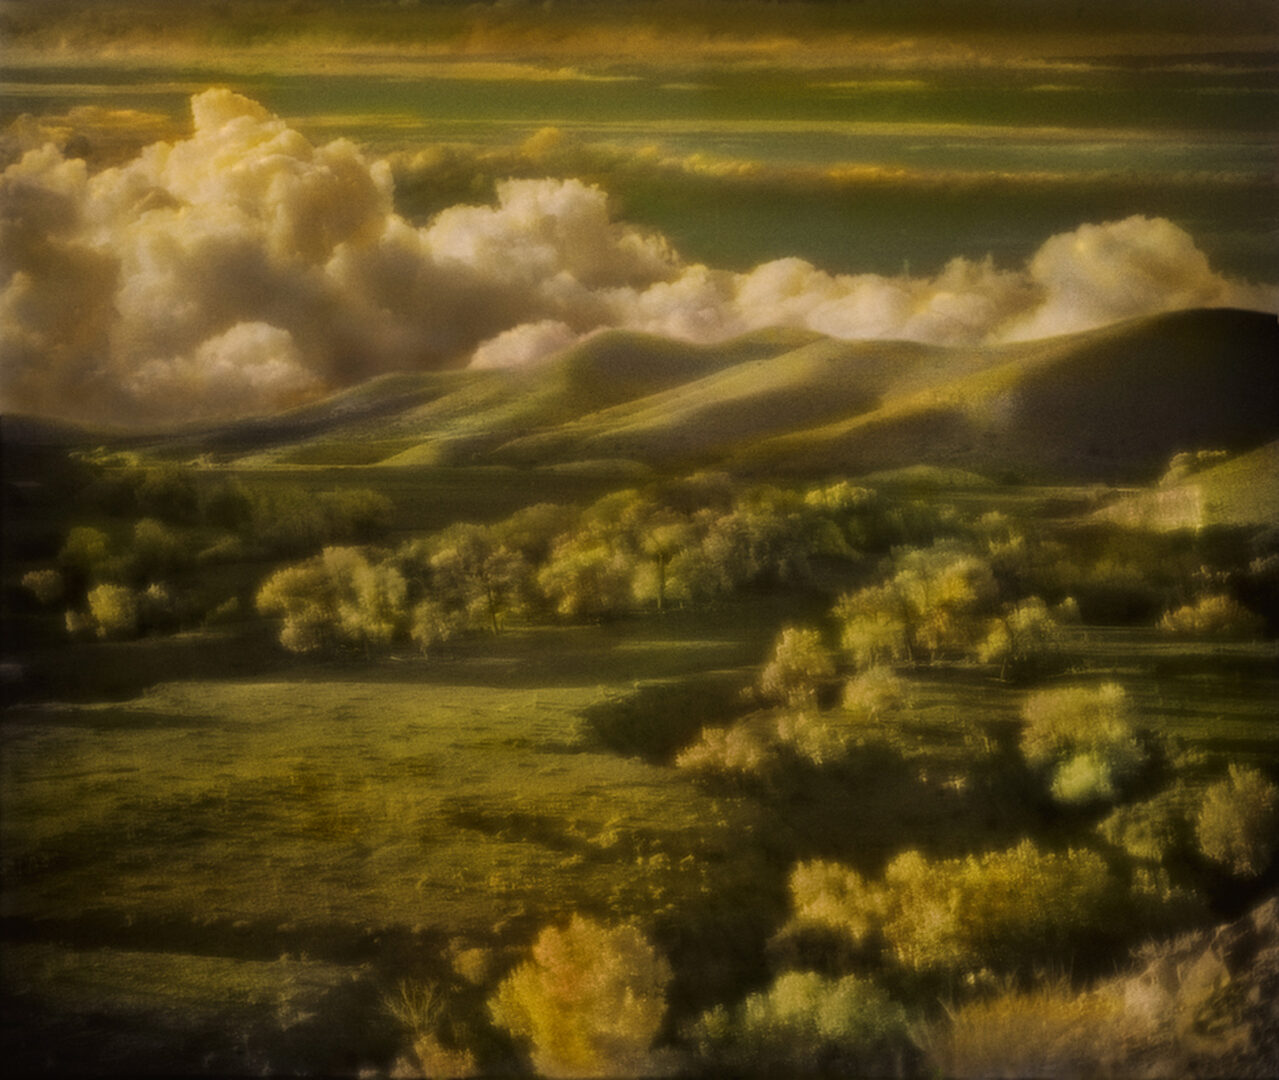 A painting of the sky and clouds over a field.